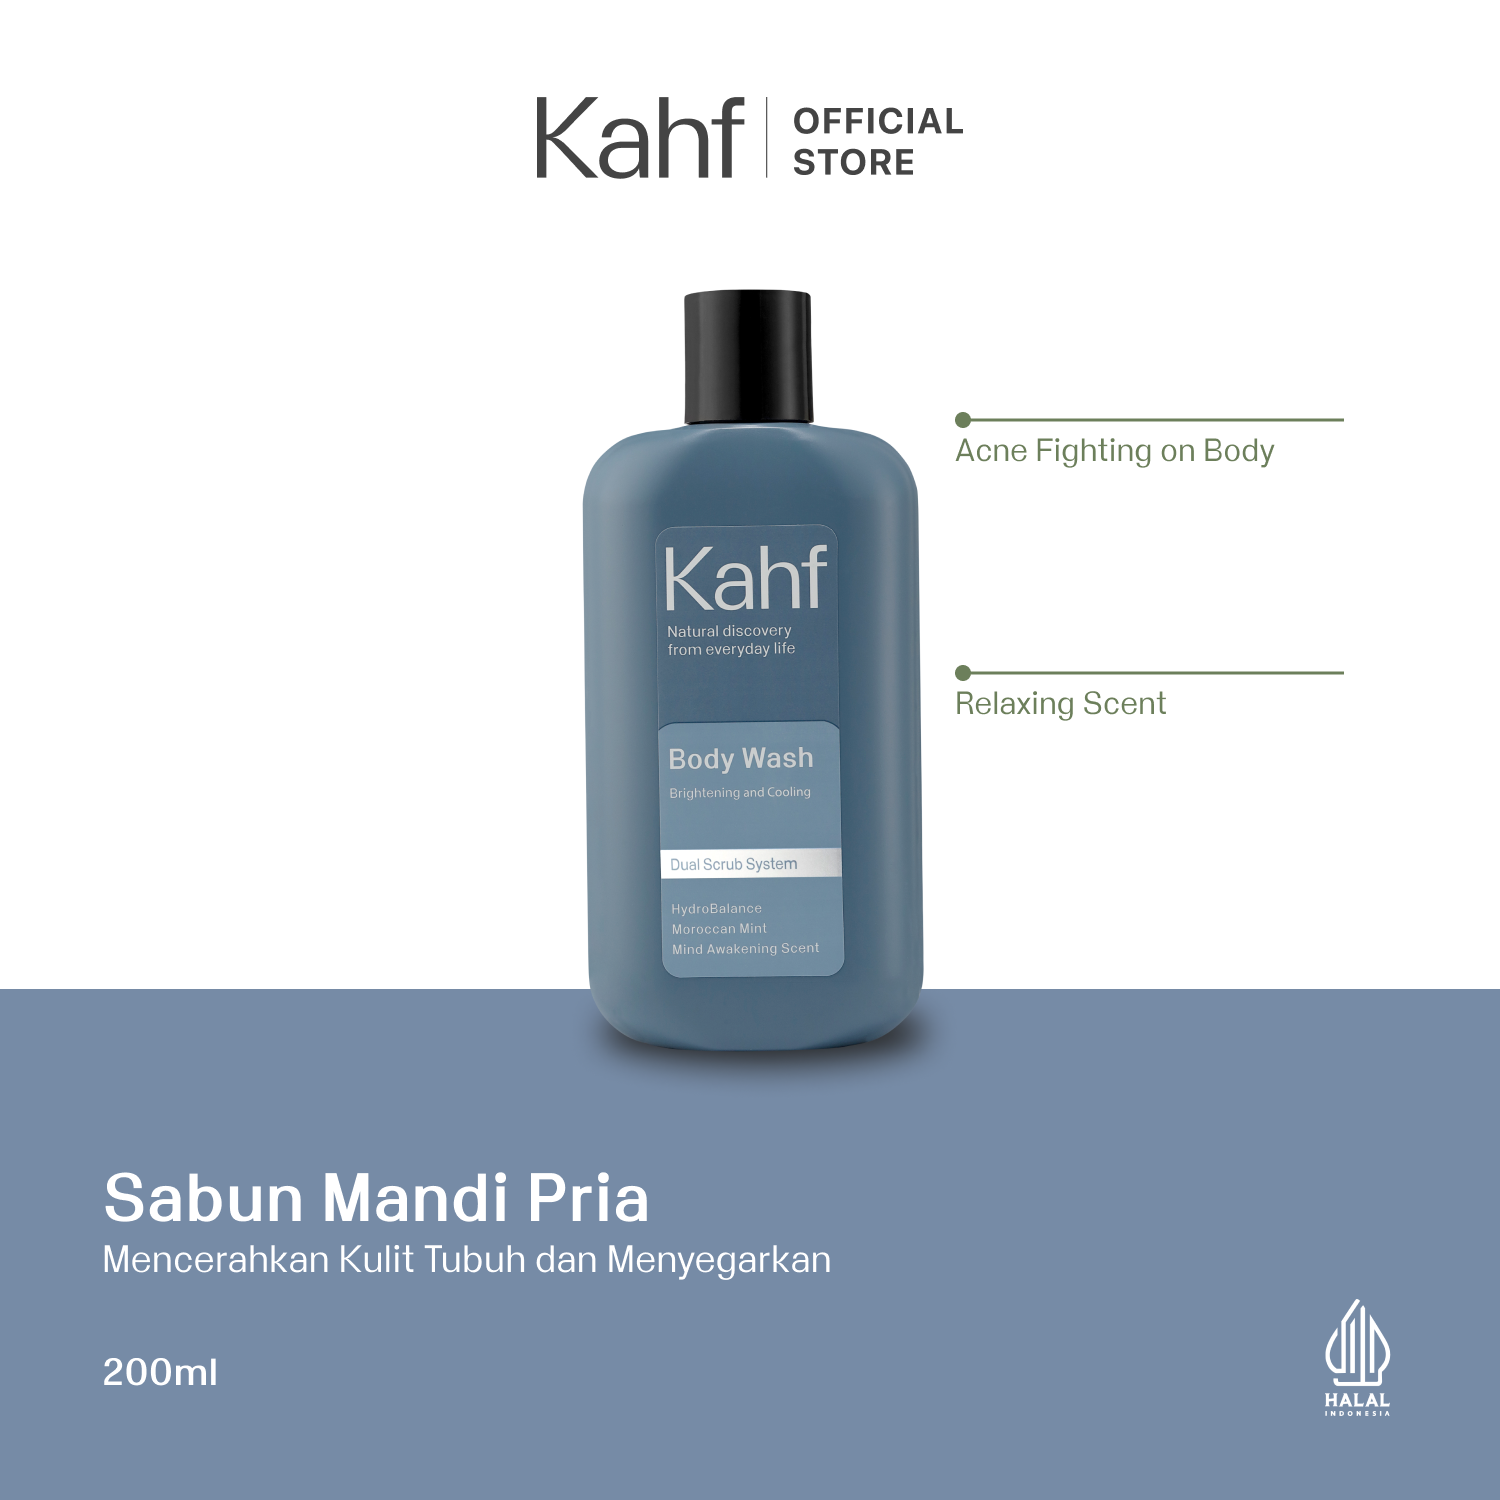 Kahf Brightening and Cooling Body Wash 200 ml